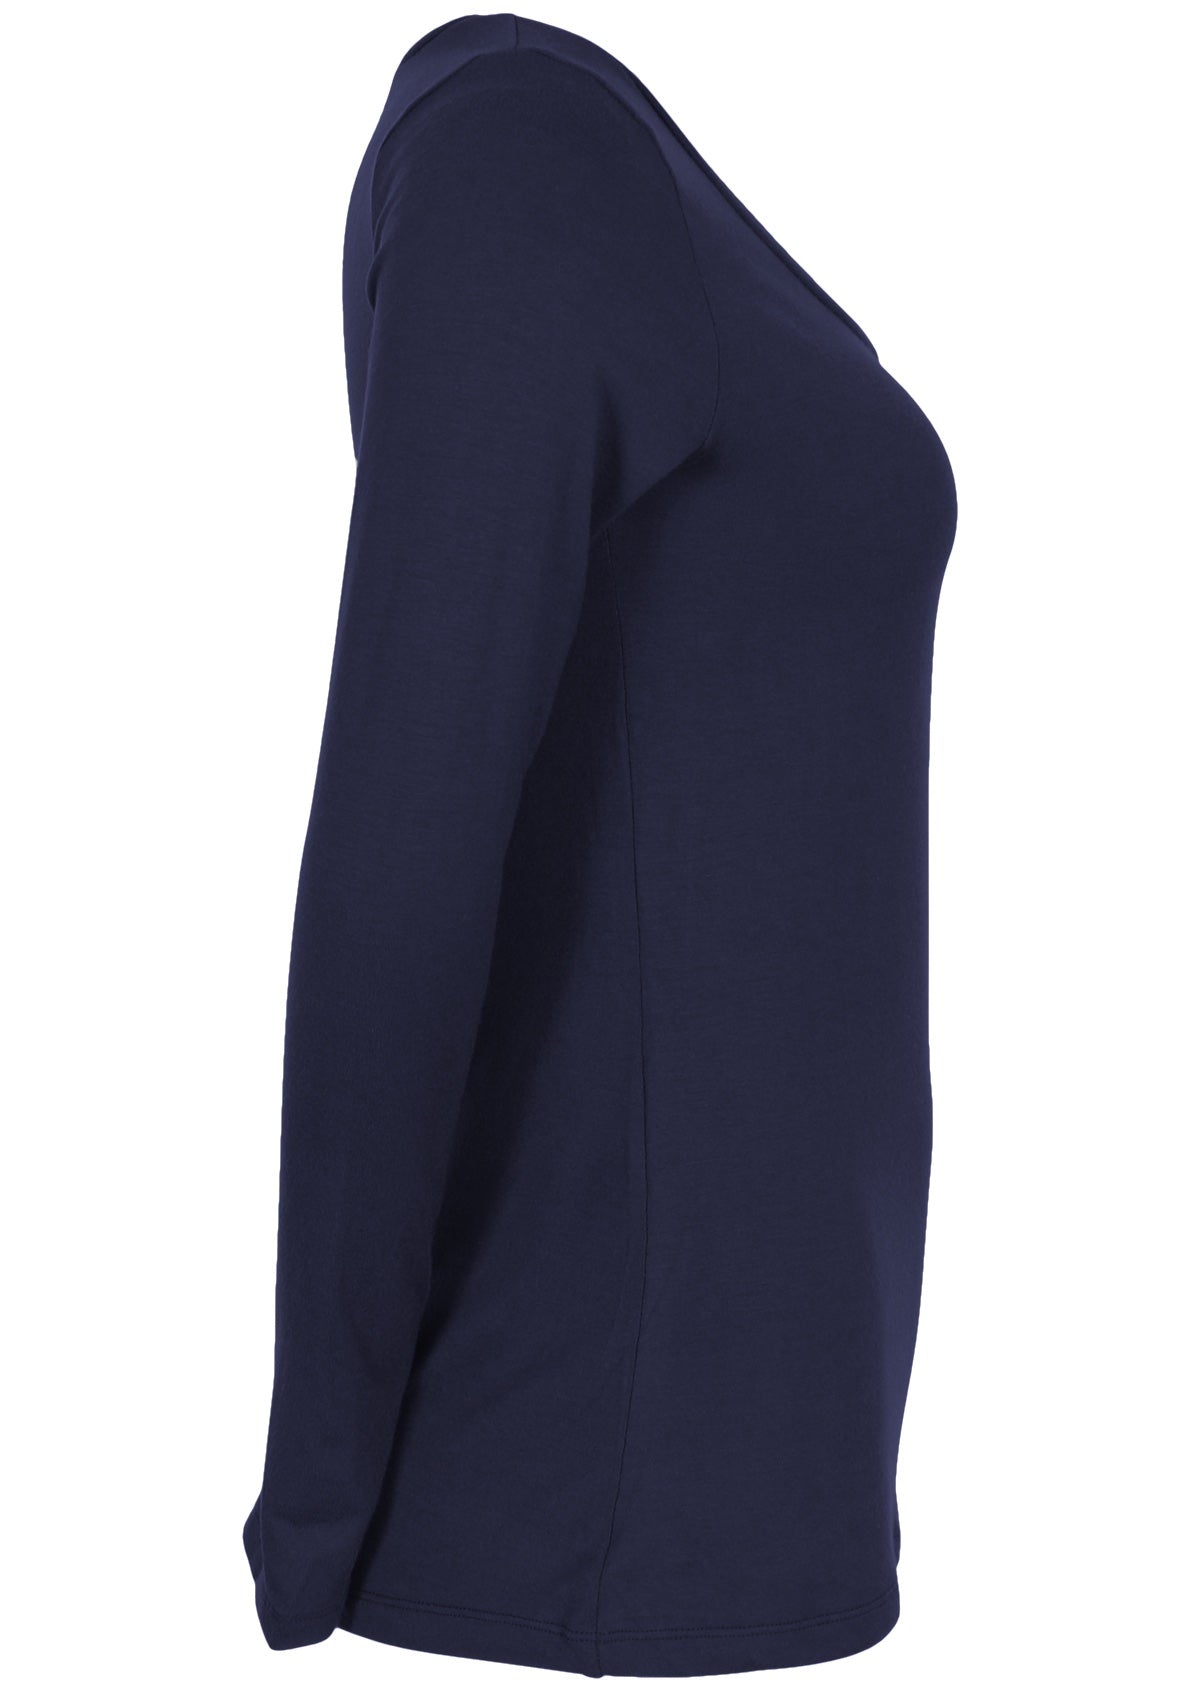 Side view of women's navy blue long sleeve stretch v-neck soft rayon top.